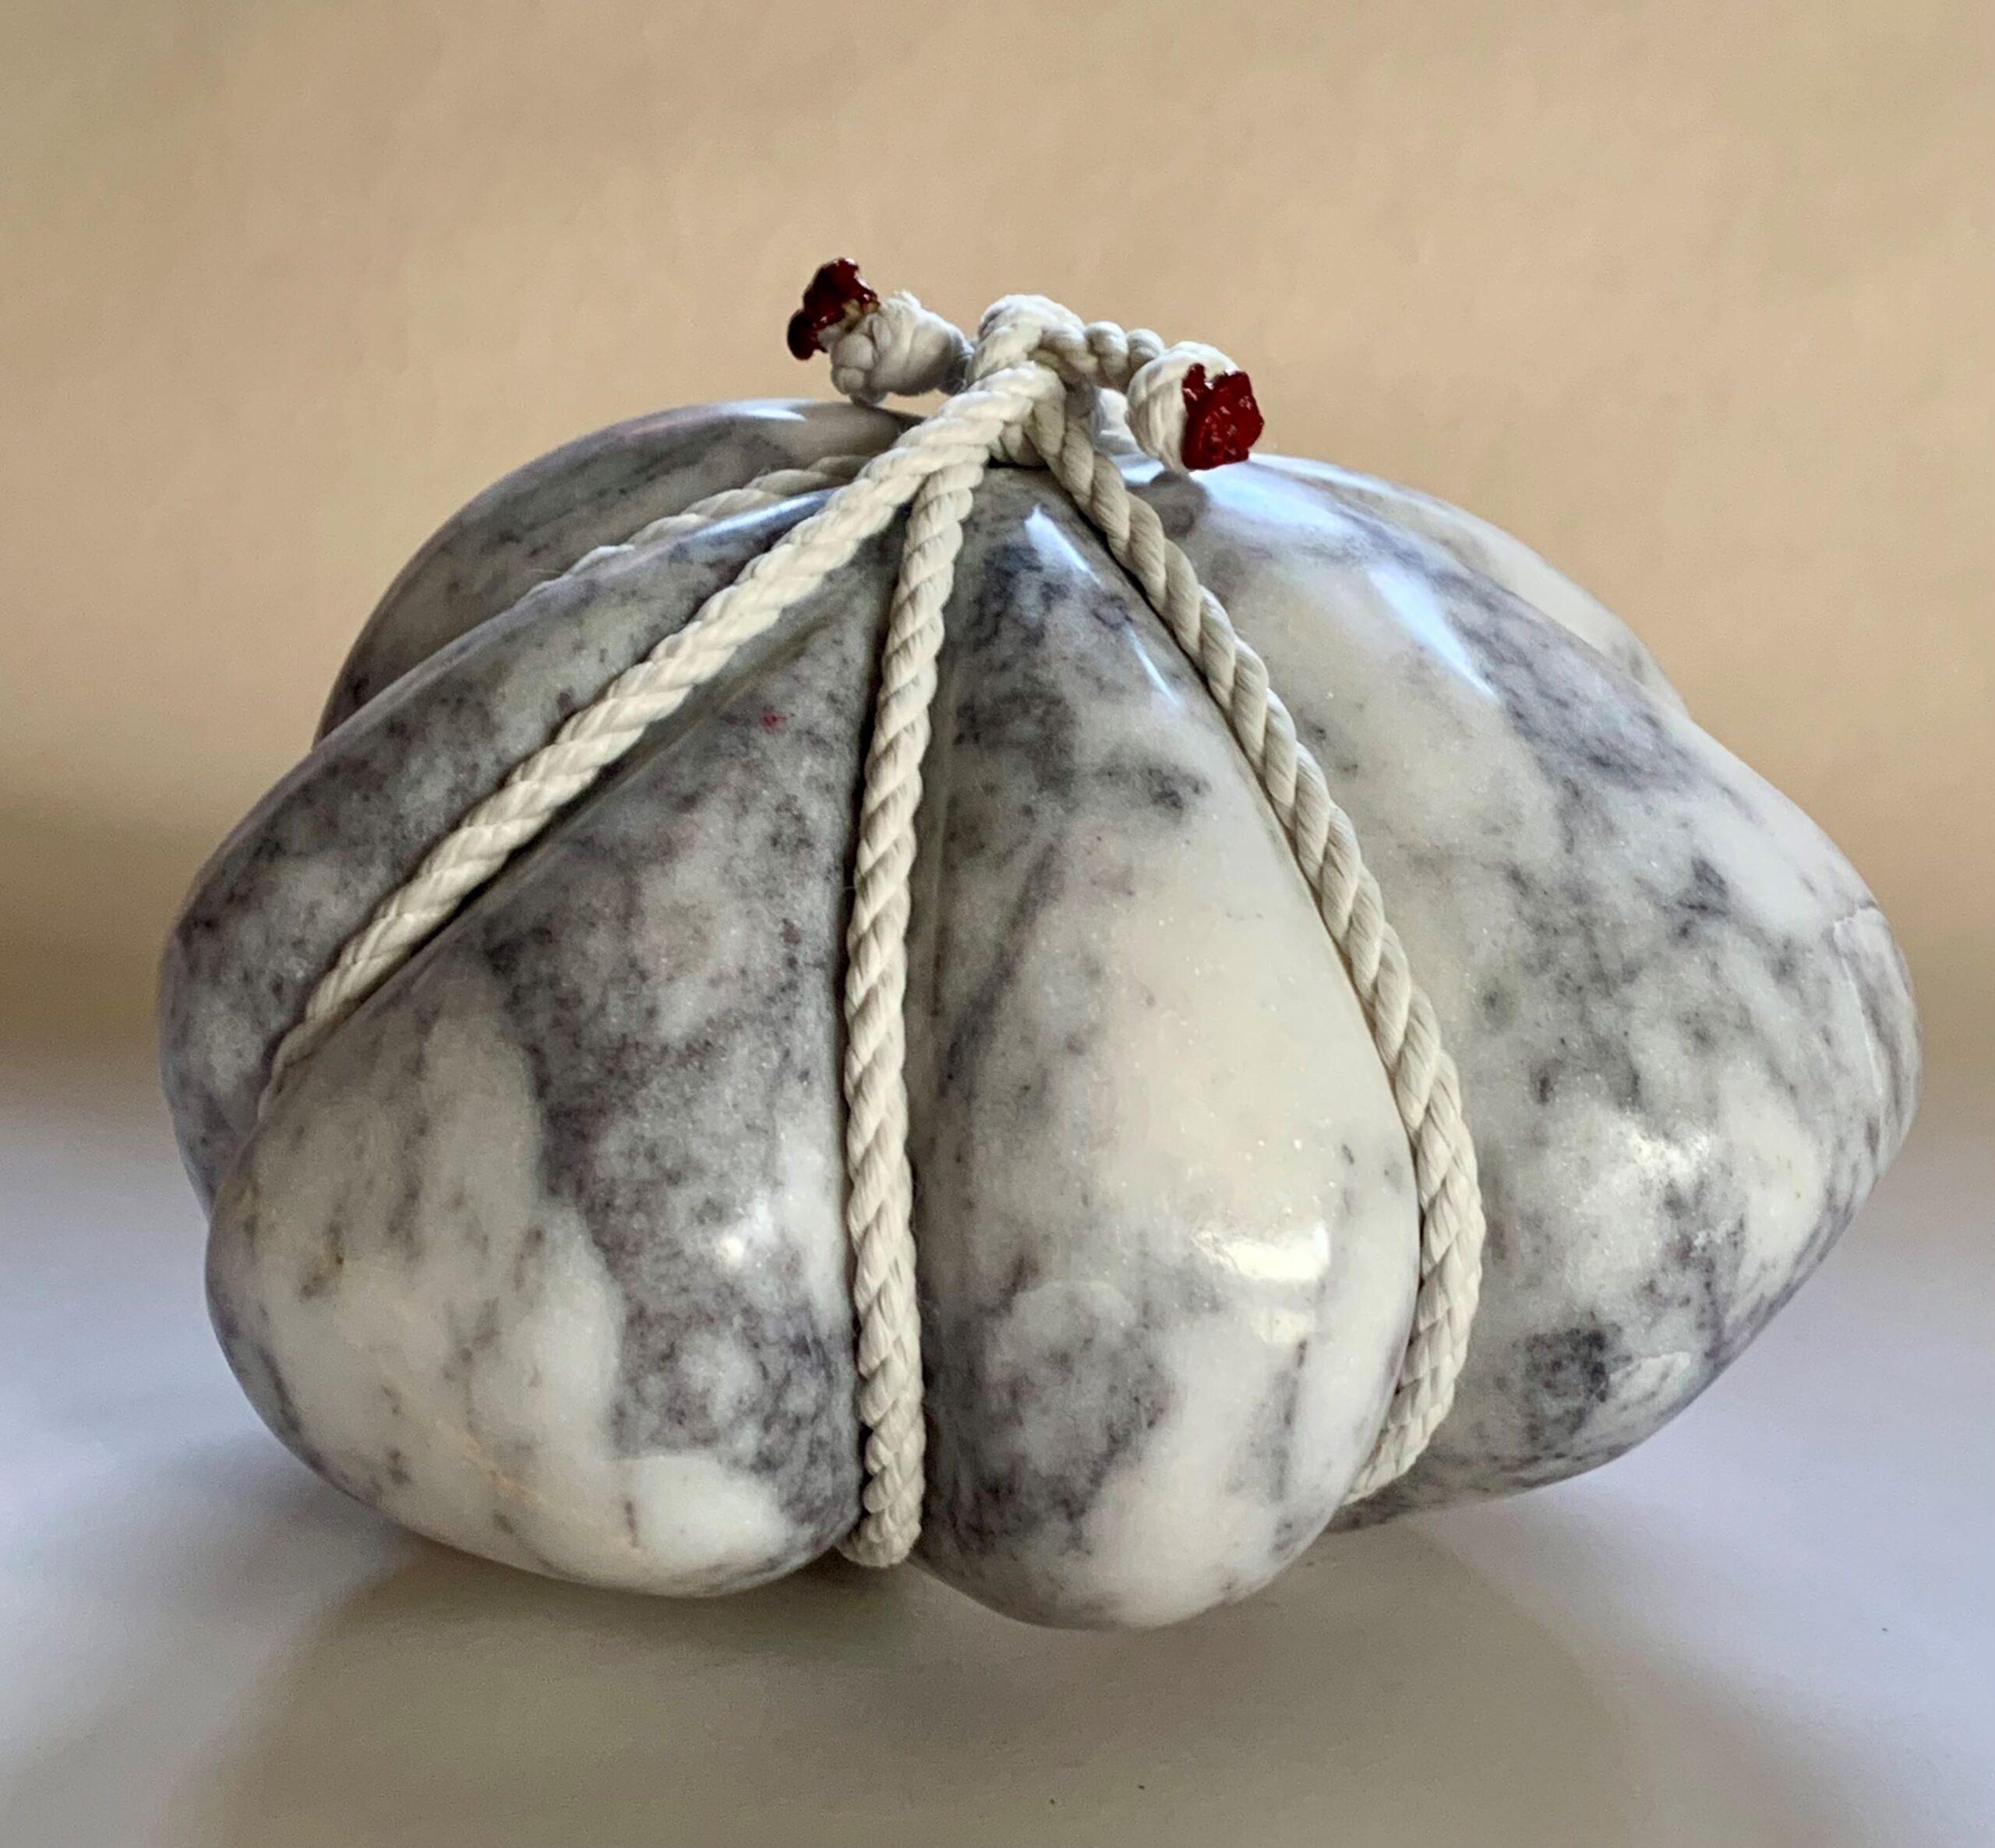 Janus is a unique Lilac marble, rope, wax sculpture by contemporary artist Peter Brooke-Ball, dimensions are 17 × 25 × 23 cm (6.7 × 9.8 × 9.1 in).  
The sculpture comes with a certificate of authenticity.

The humour, simplicity, and sensuality of